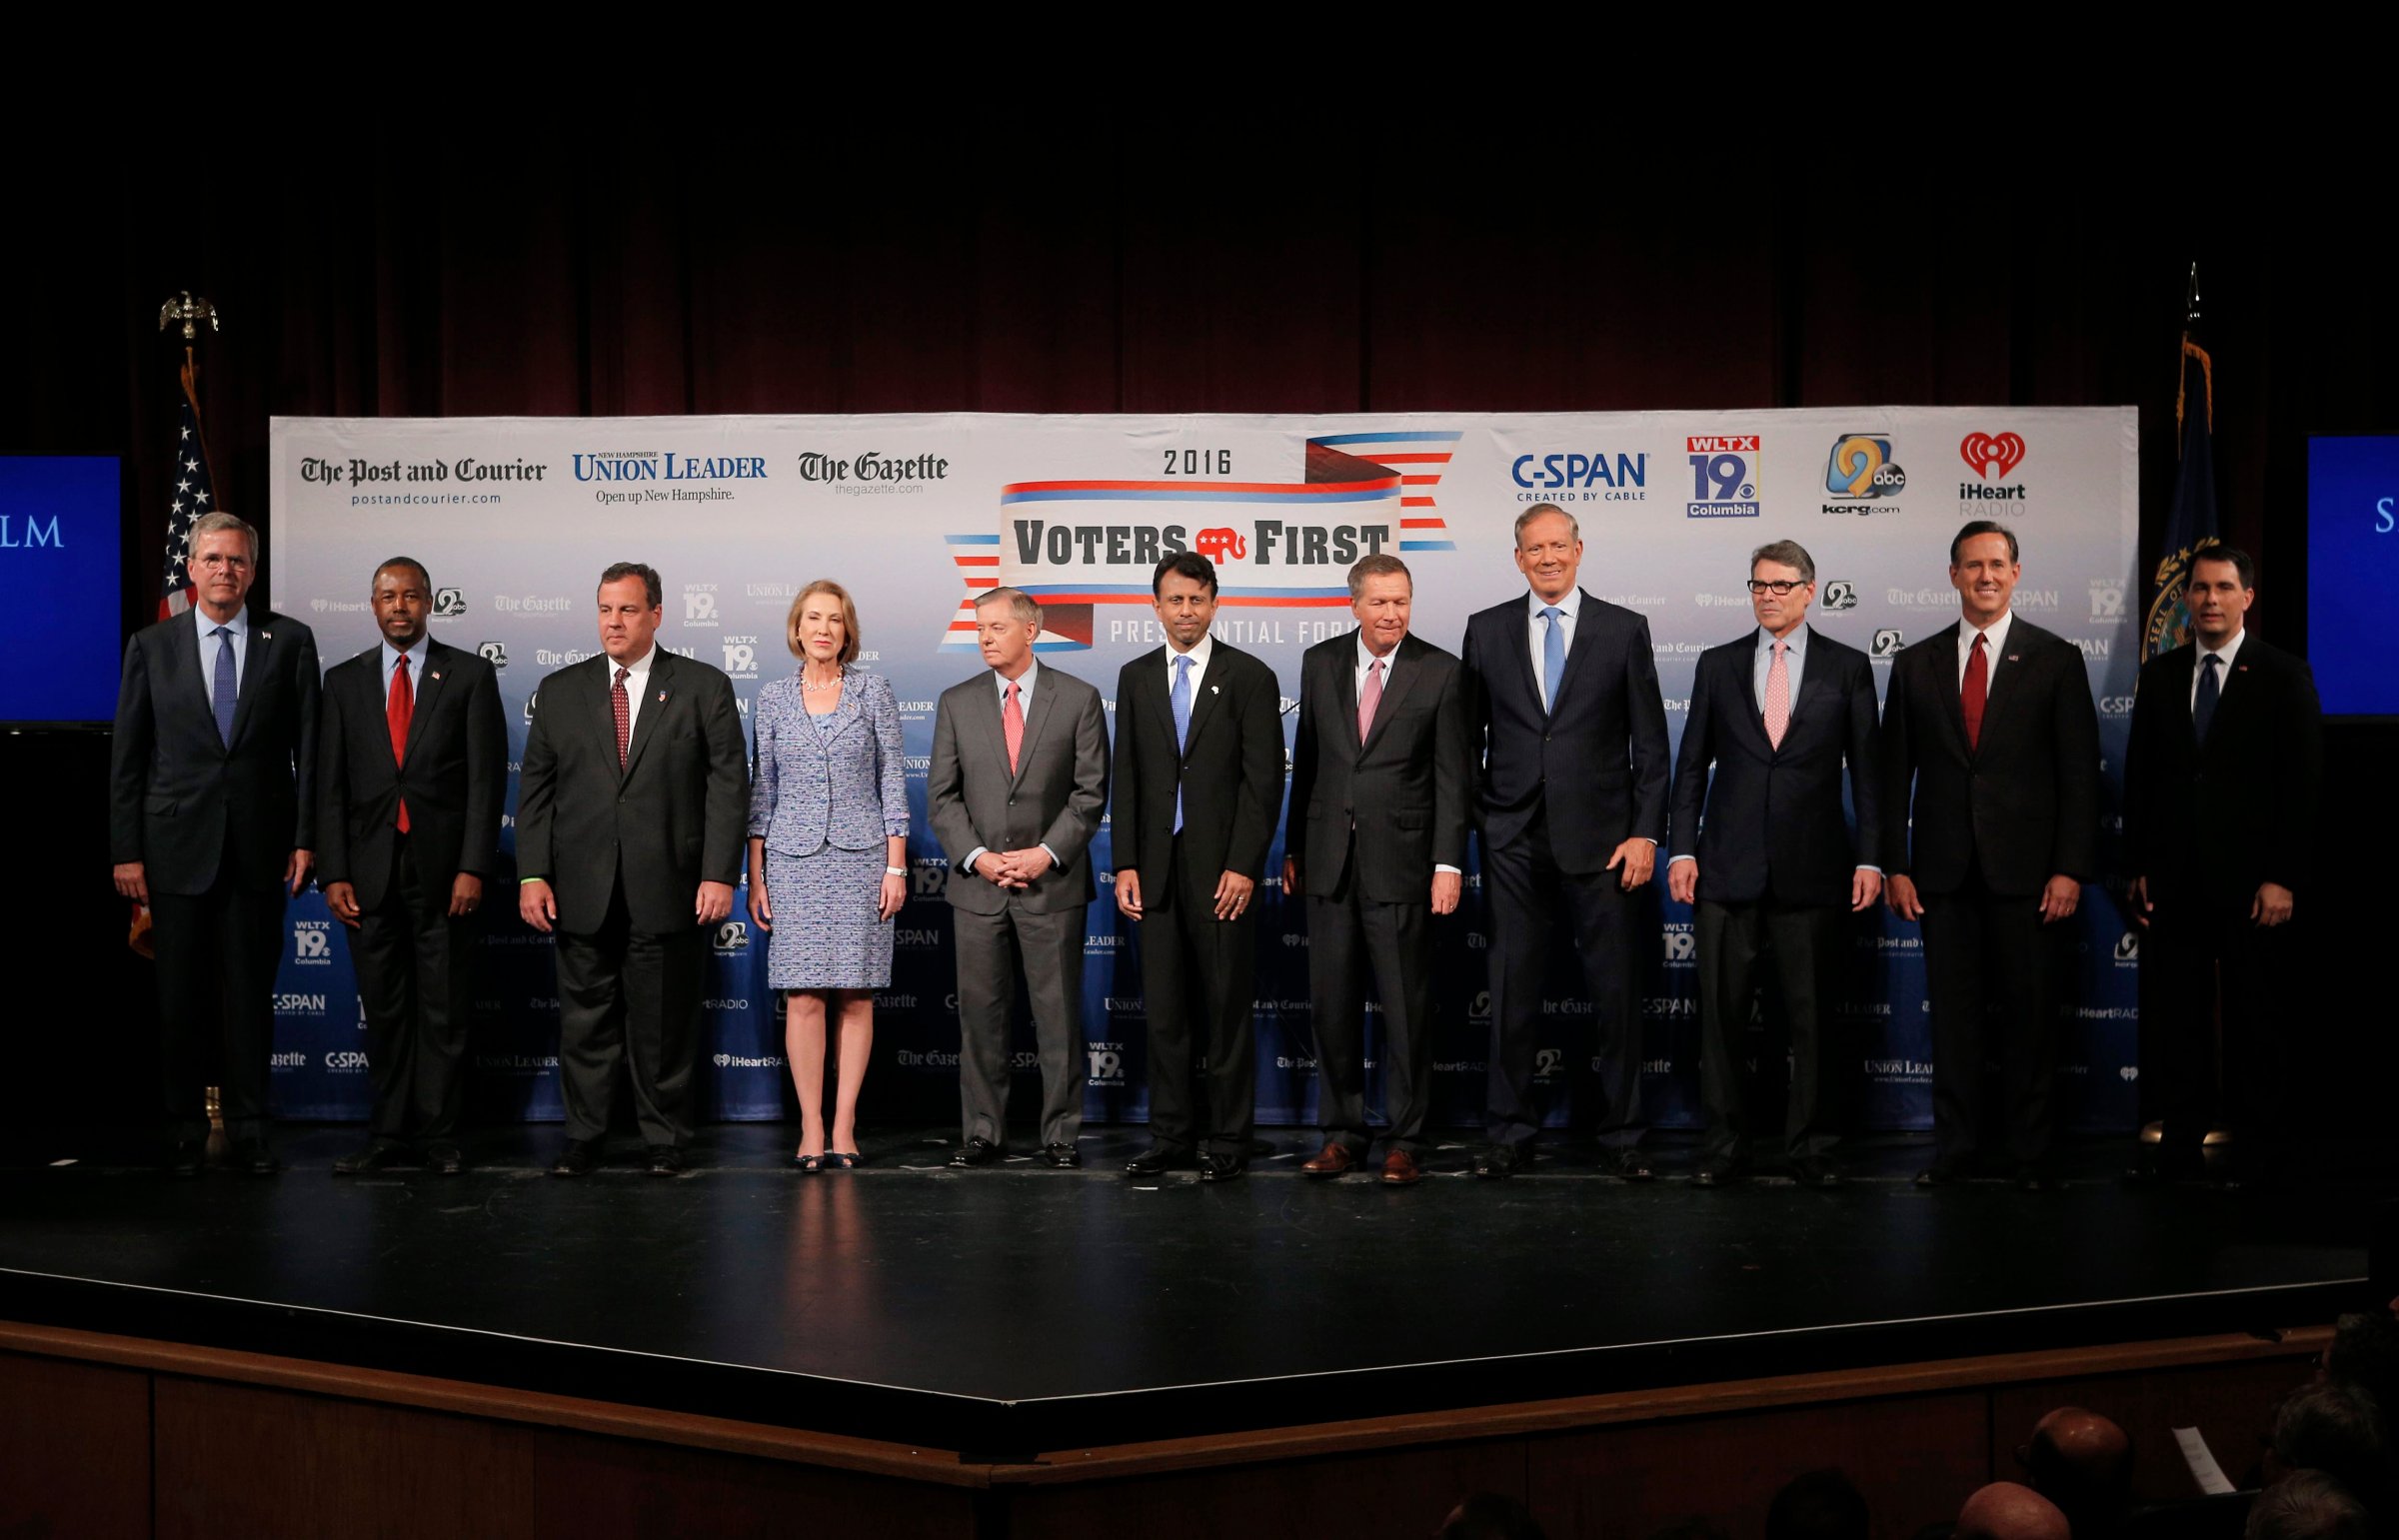 Eleven of the declared 2016 Republican U.S. presidential candidates pose together on stage before the start of the the Voters First Presidential Forum in Manchester